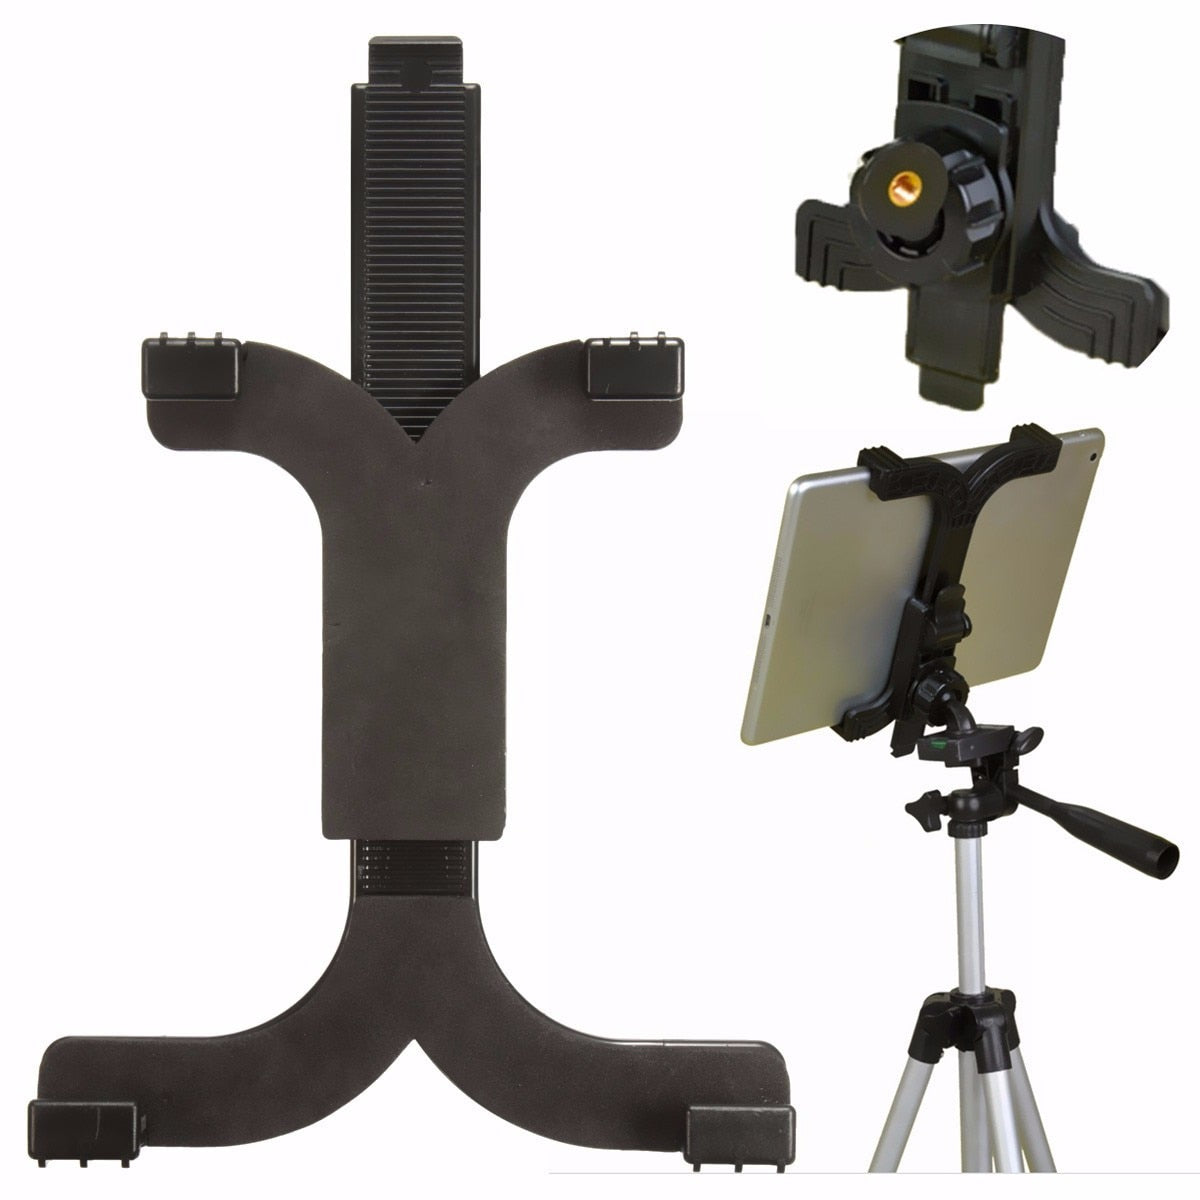 ABS Selfie Tripod Stand for 7